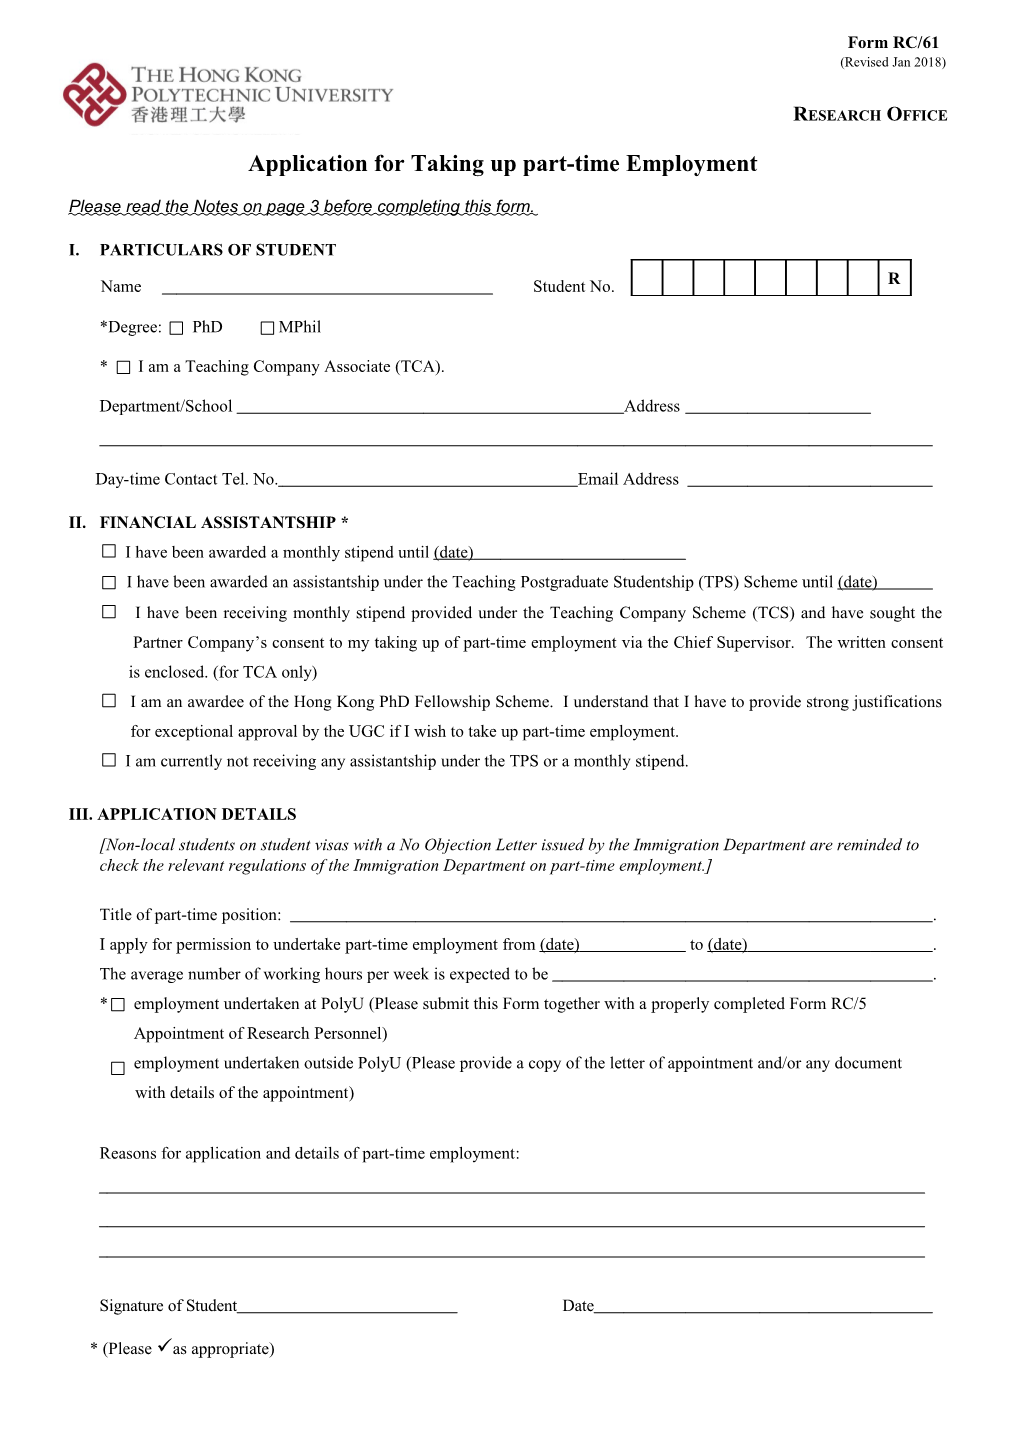 Application for Taking up Part-Time Employment